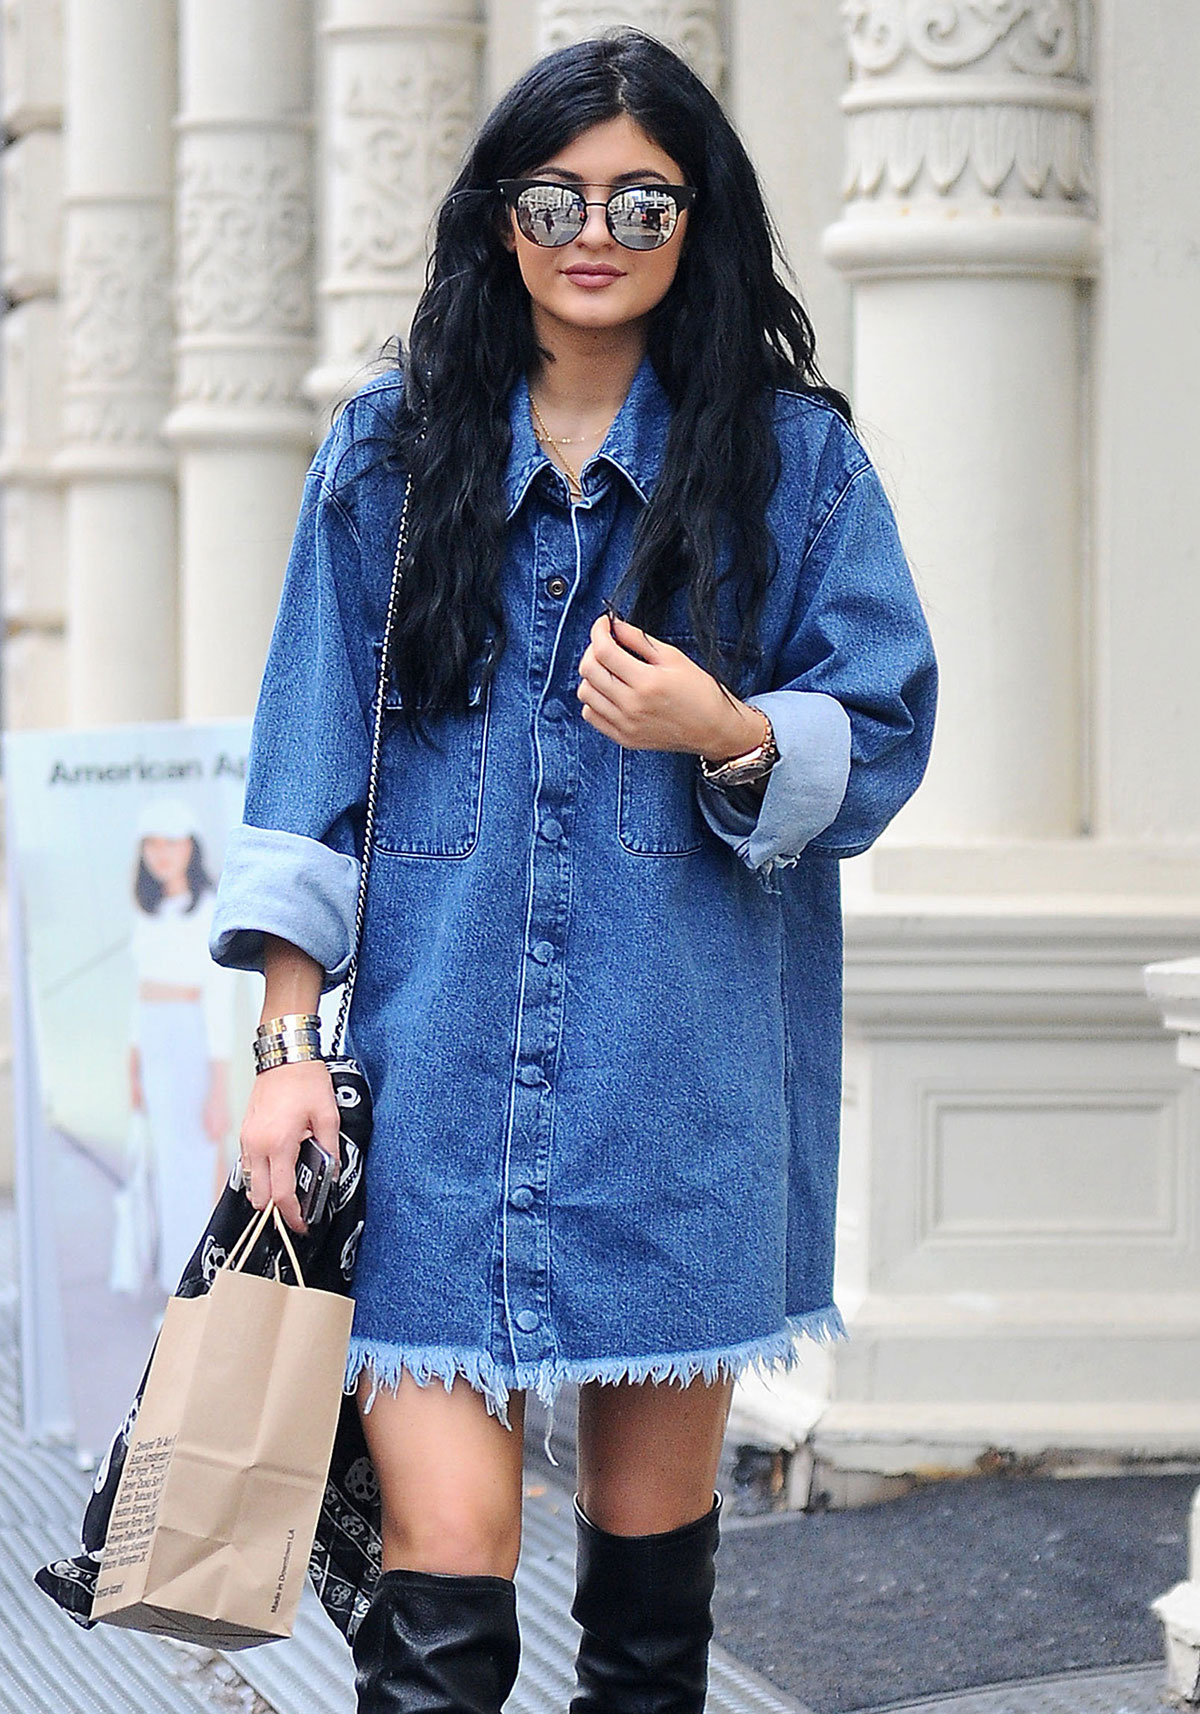 Kylie Jenner out in Soho district of New York City